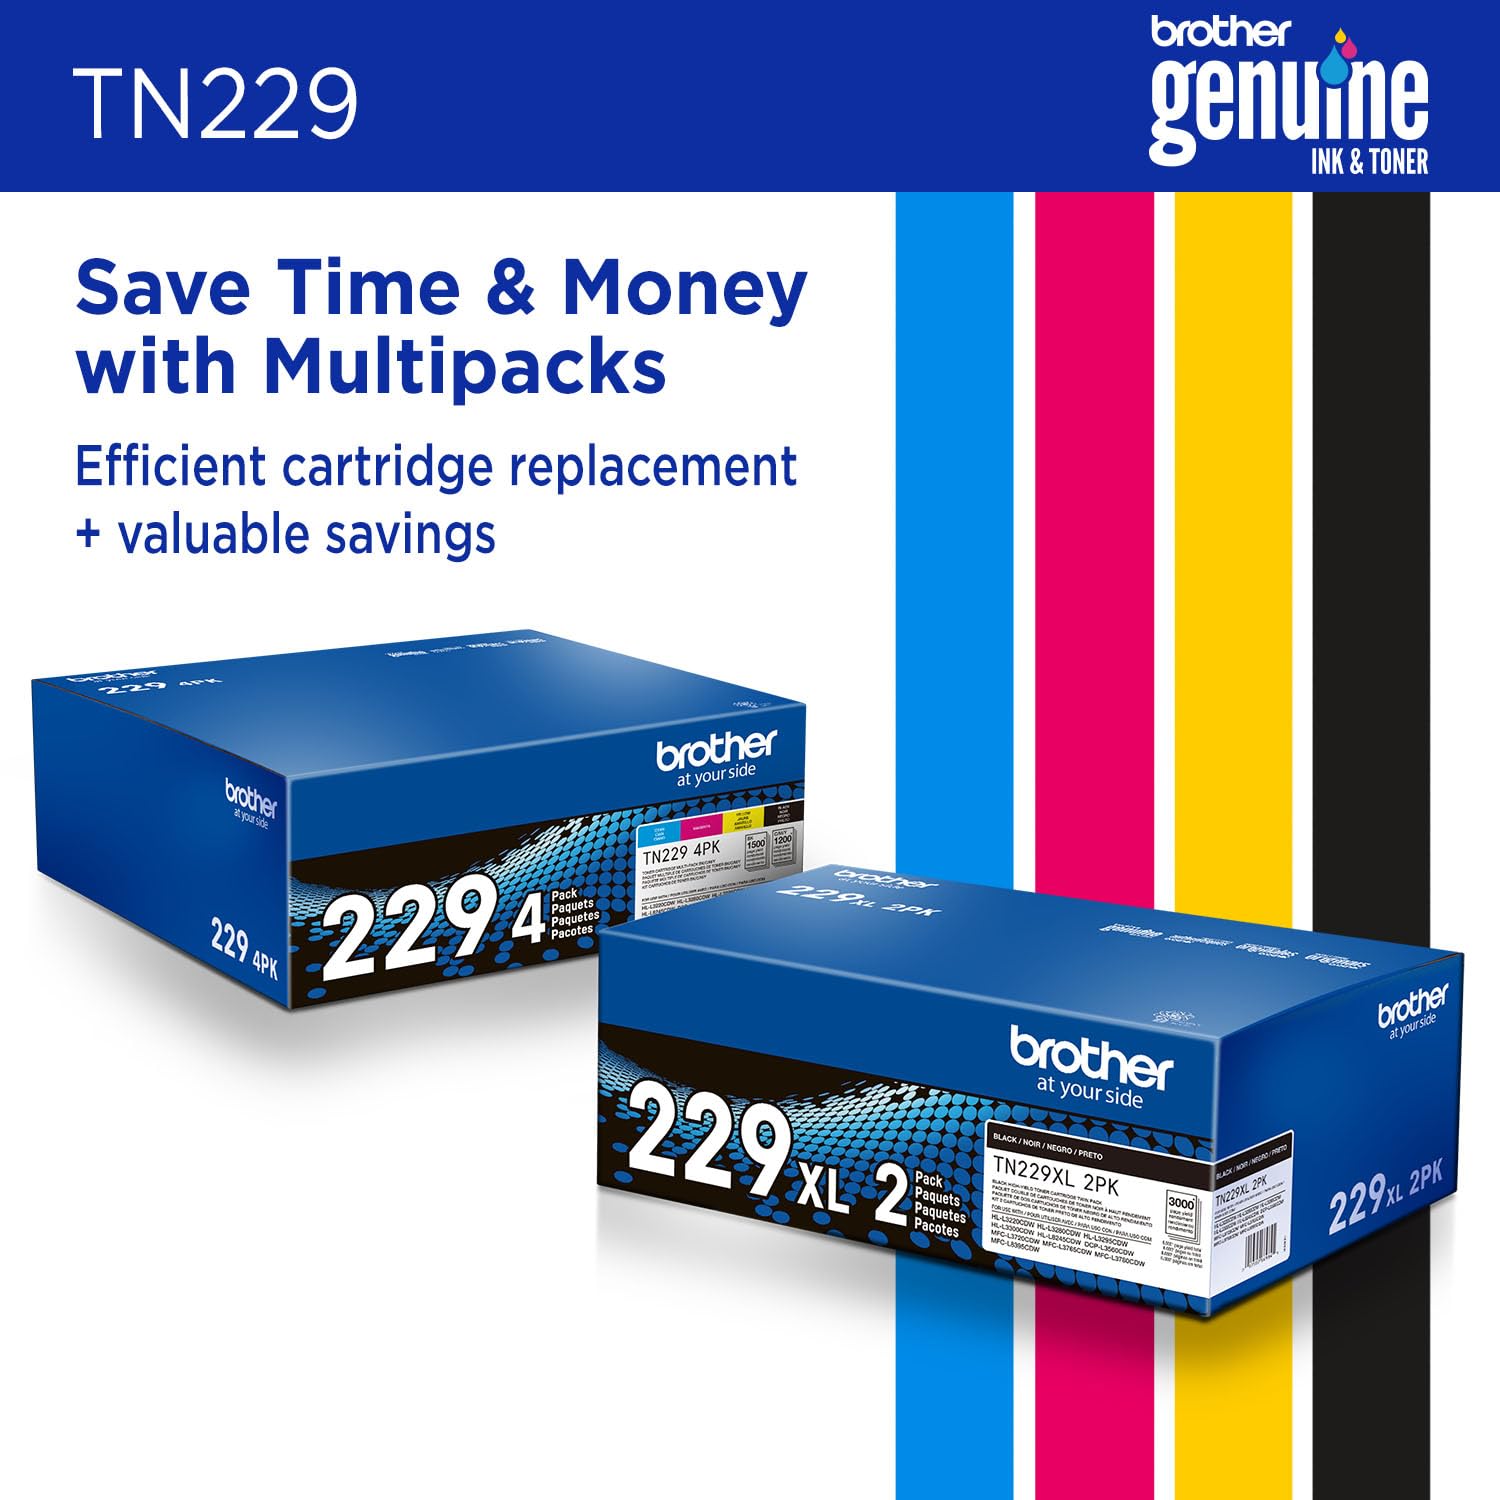 Brother Genuine TN229Y Yellow Standard Yield Printer Toner Cartridge - Print up to 1,200 Pages(1)